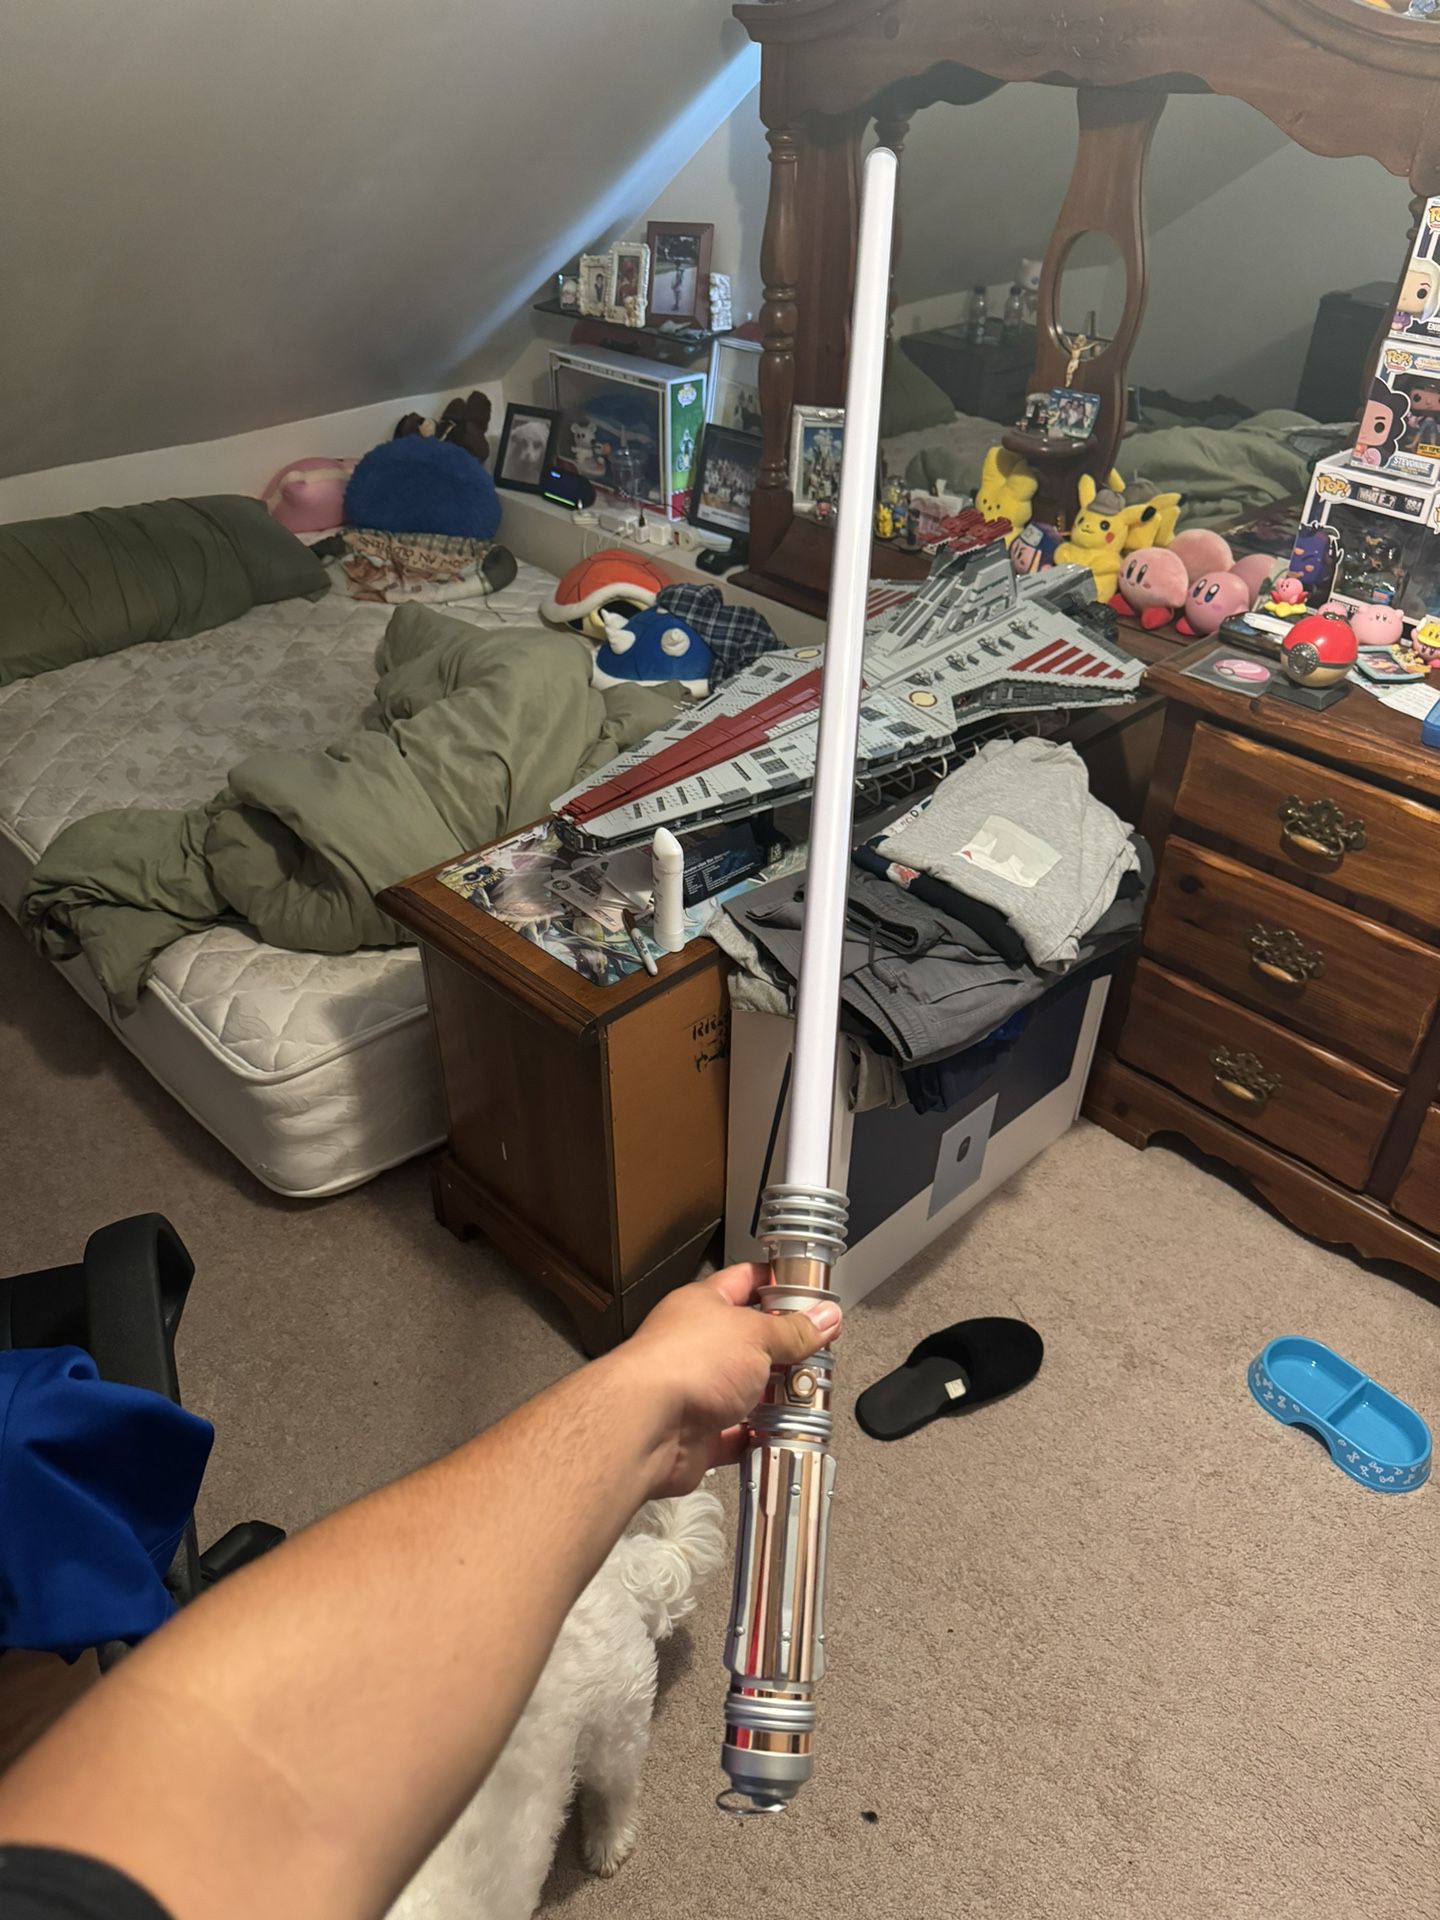 LEIA LIGHTSABER IN VERY GOOD CONDITION 